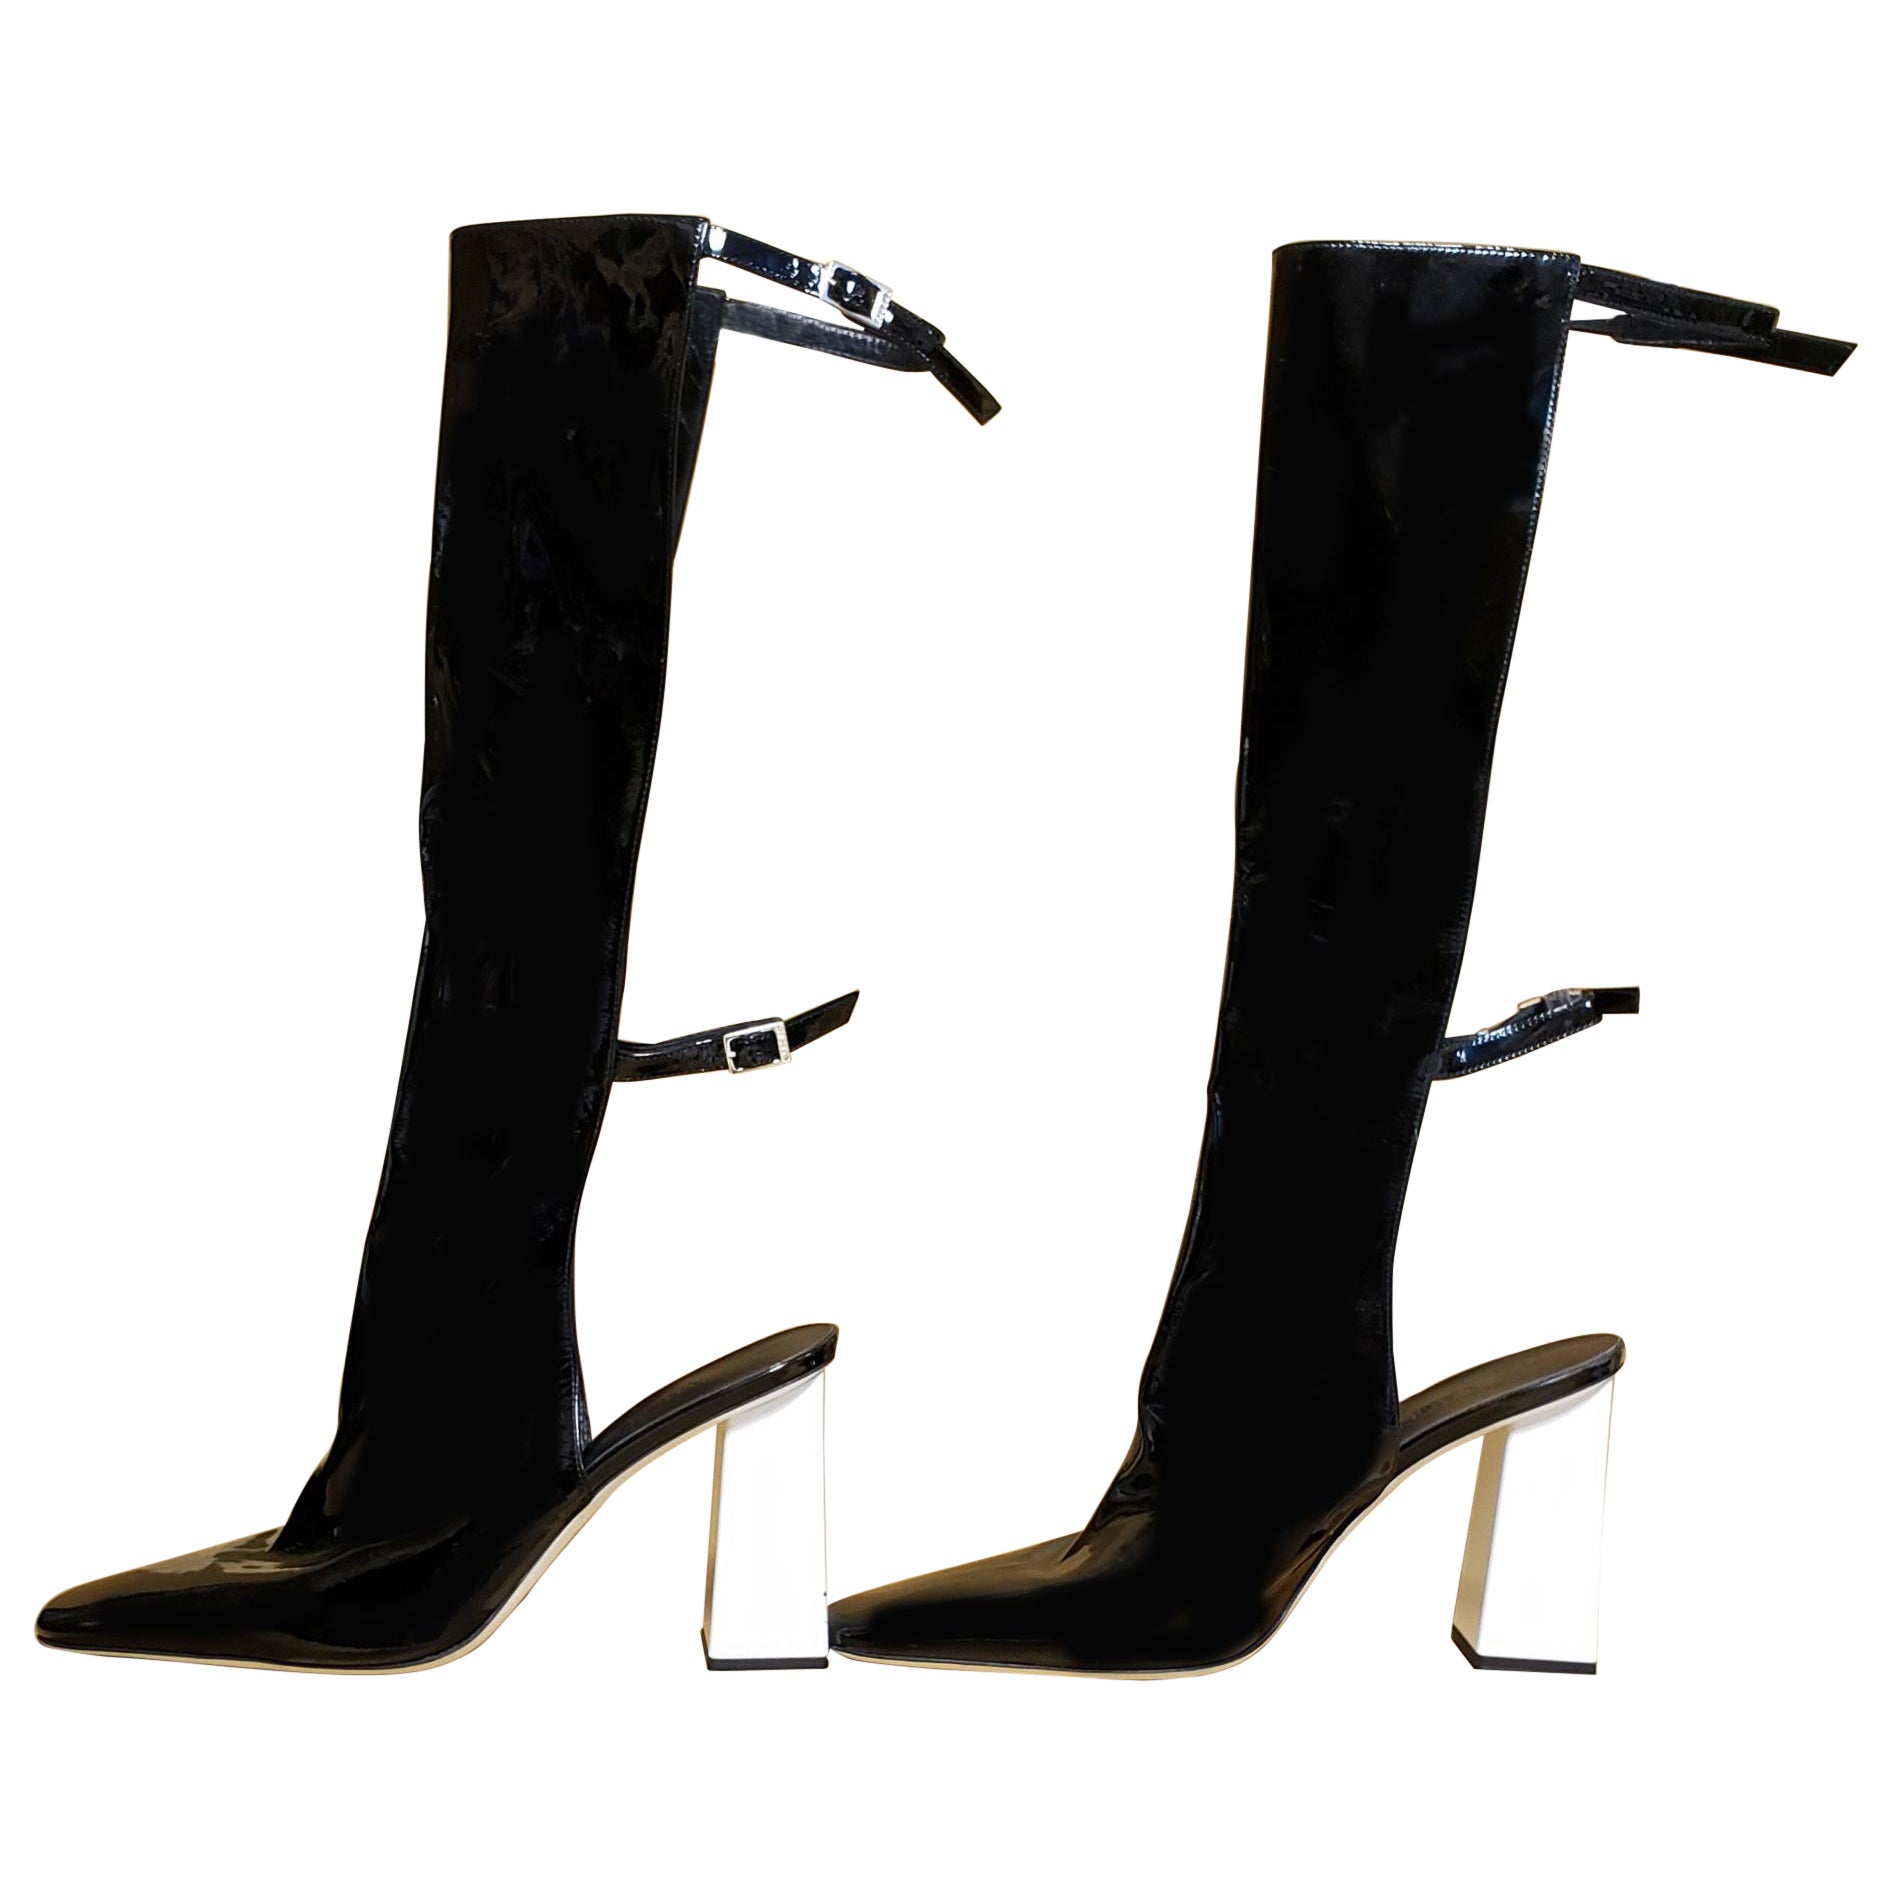 New VERSUS VERSACE BLACK PATENT LEATHER BOOTS 40.5 - 10.5